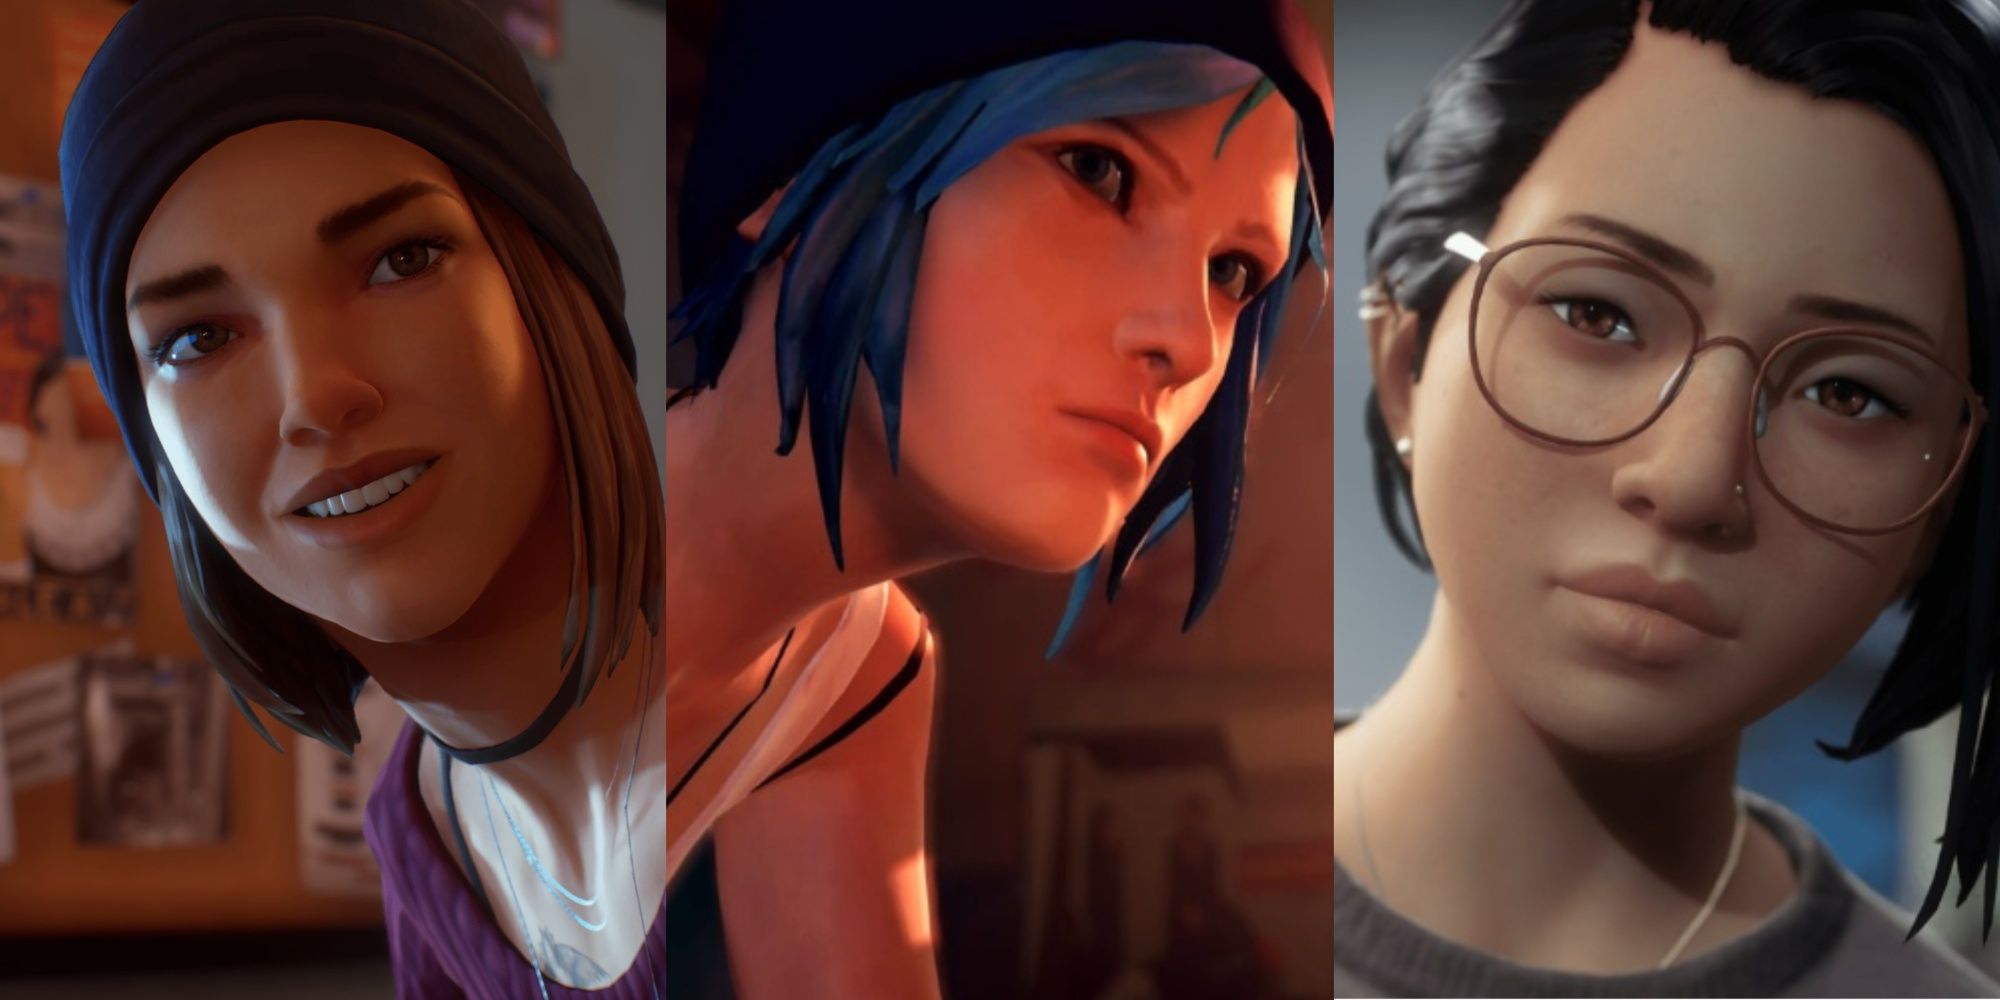 A trisplit of Steph from Life Is Strange: Before The Storm, Chloe from Life Is Strange and Alex from Life Is Strange: True Colors